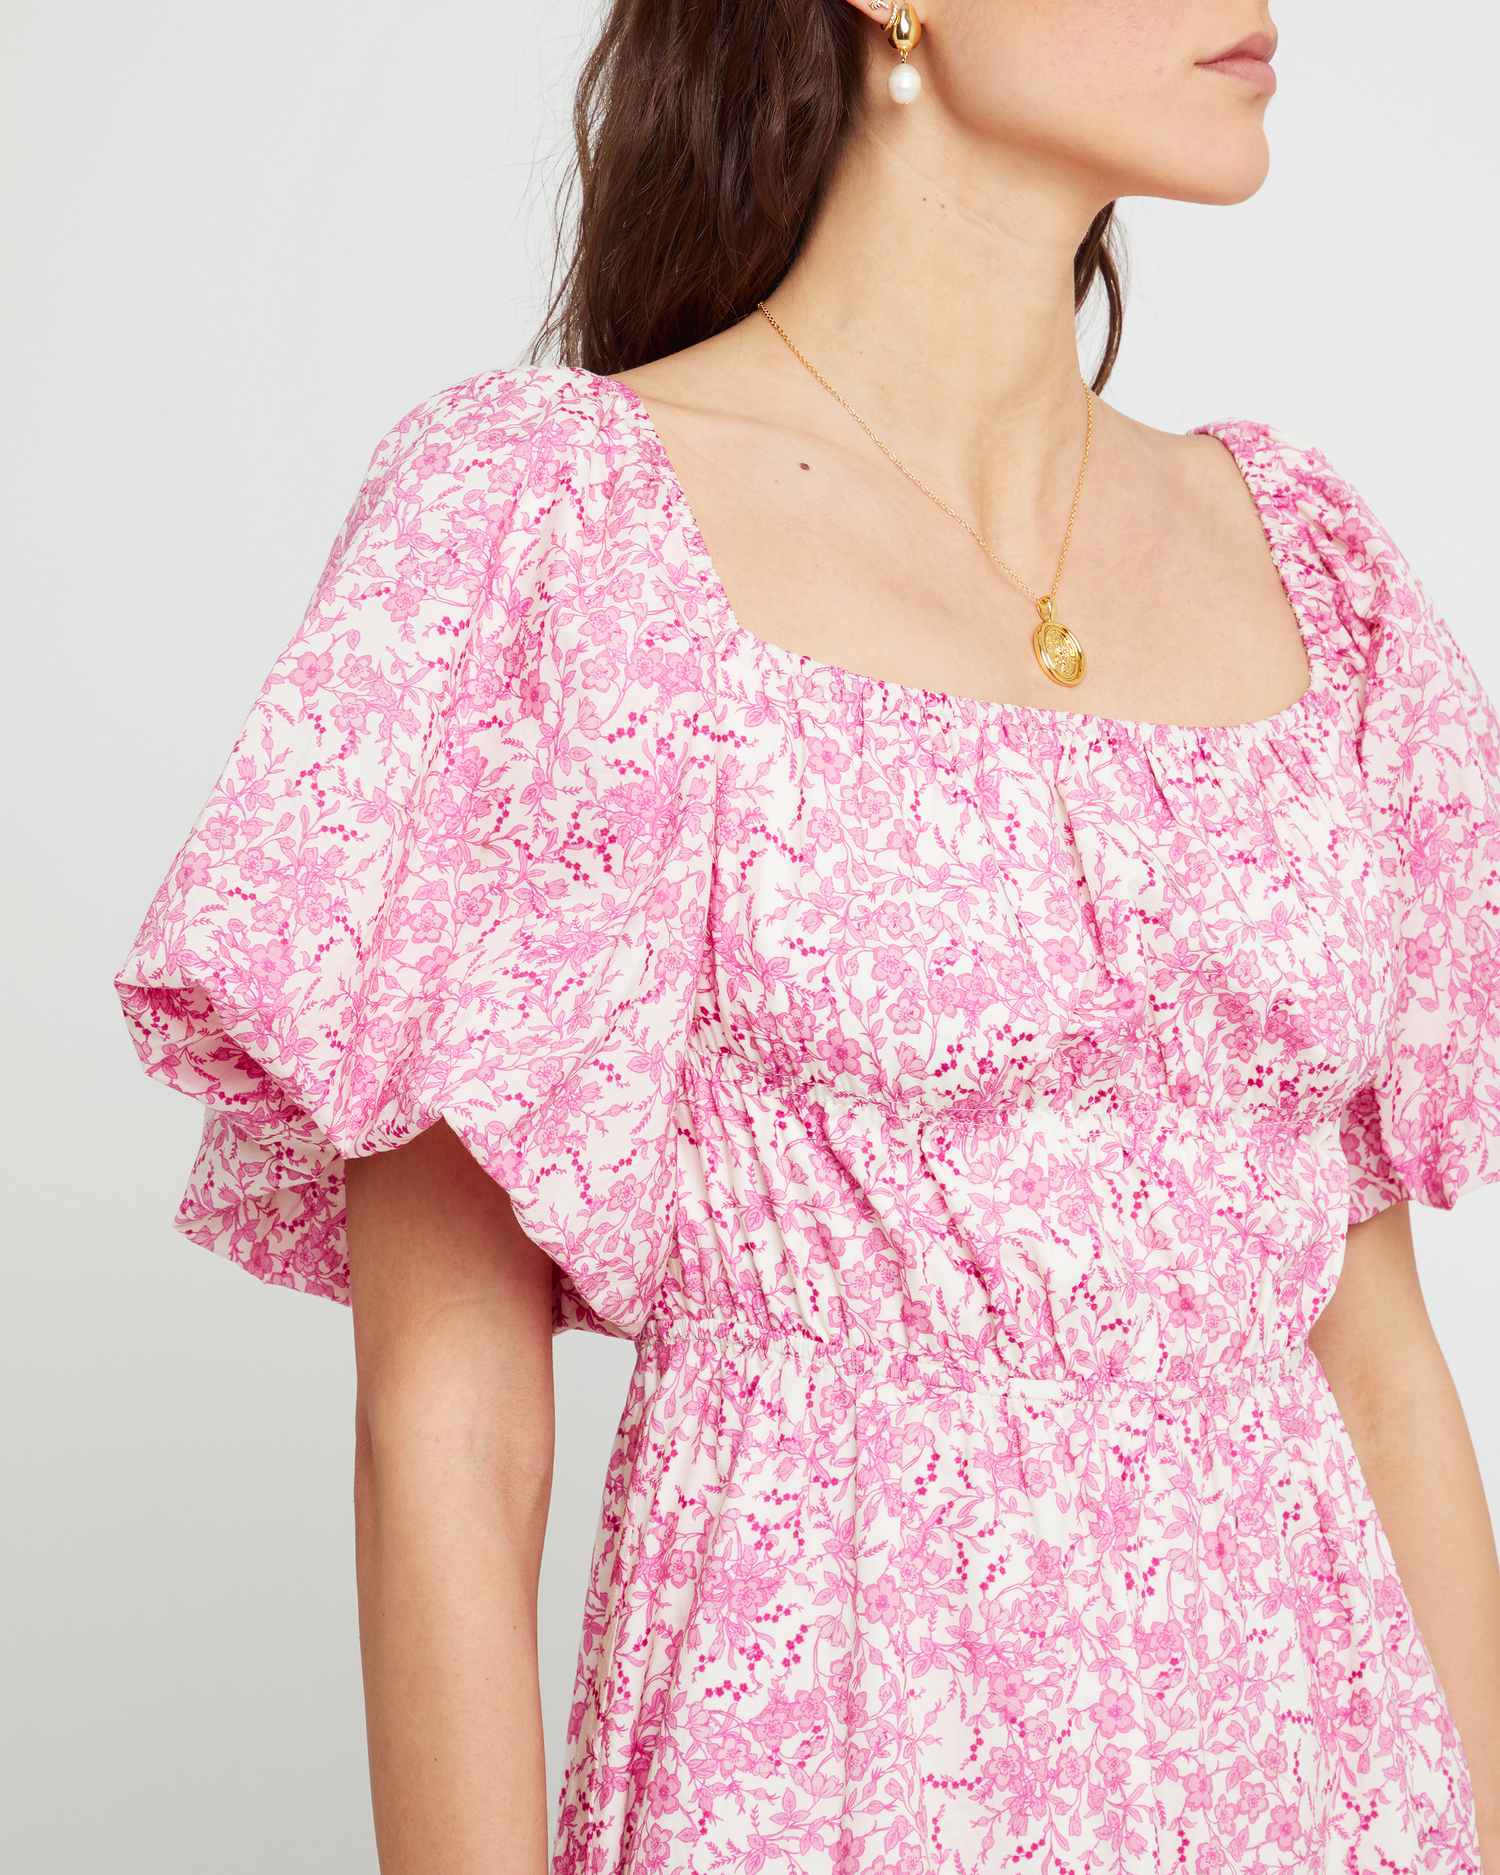 Fifth image of Leanna Dress, a pink mini dress, floral, puff sleeves, short sleeves, gathered